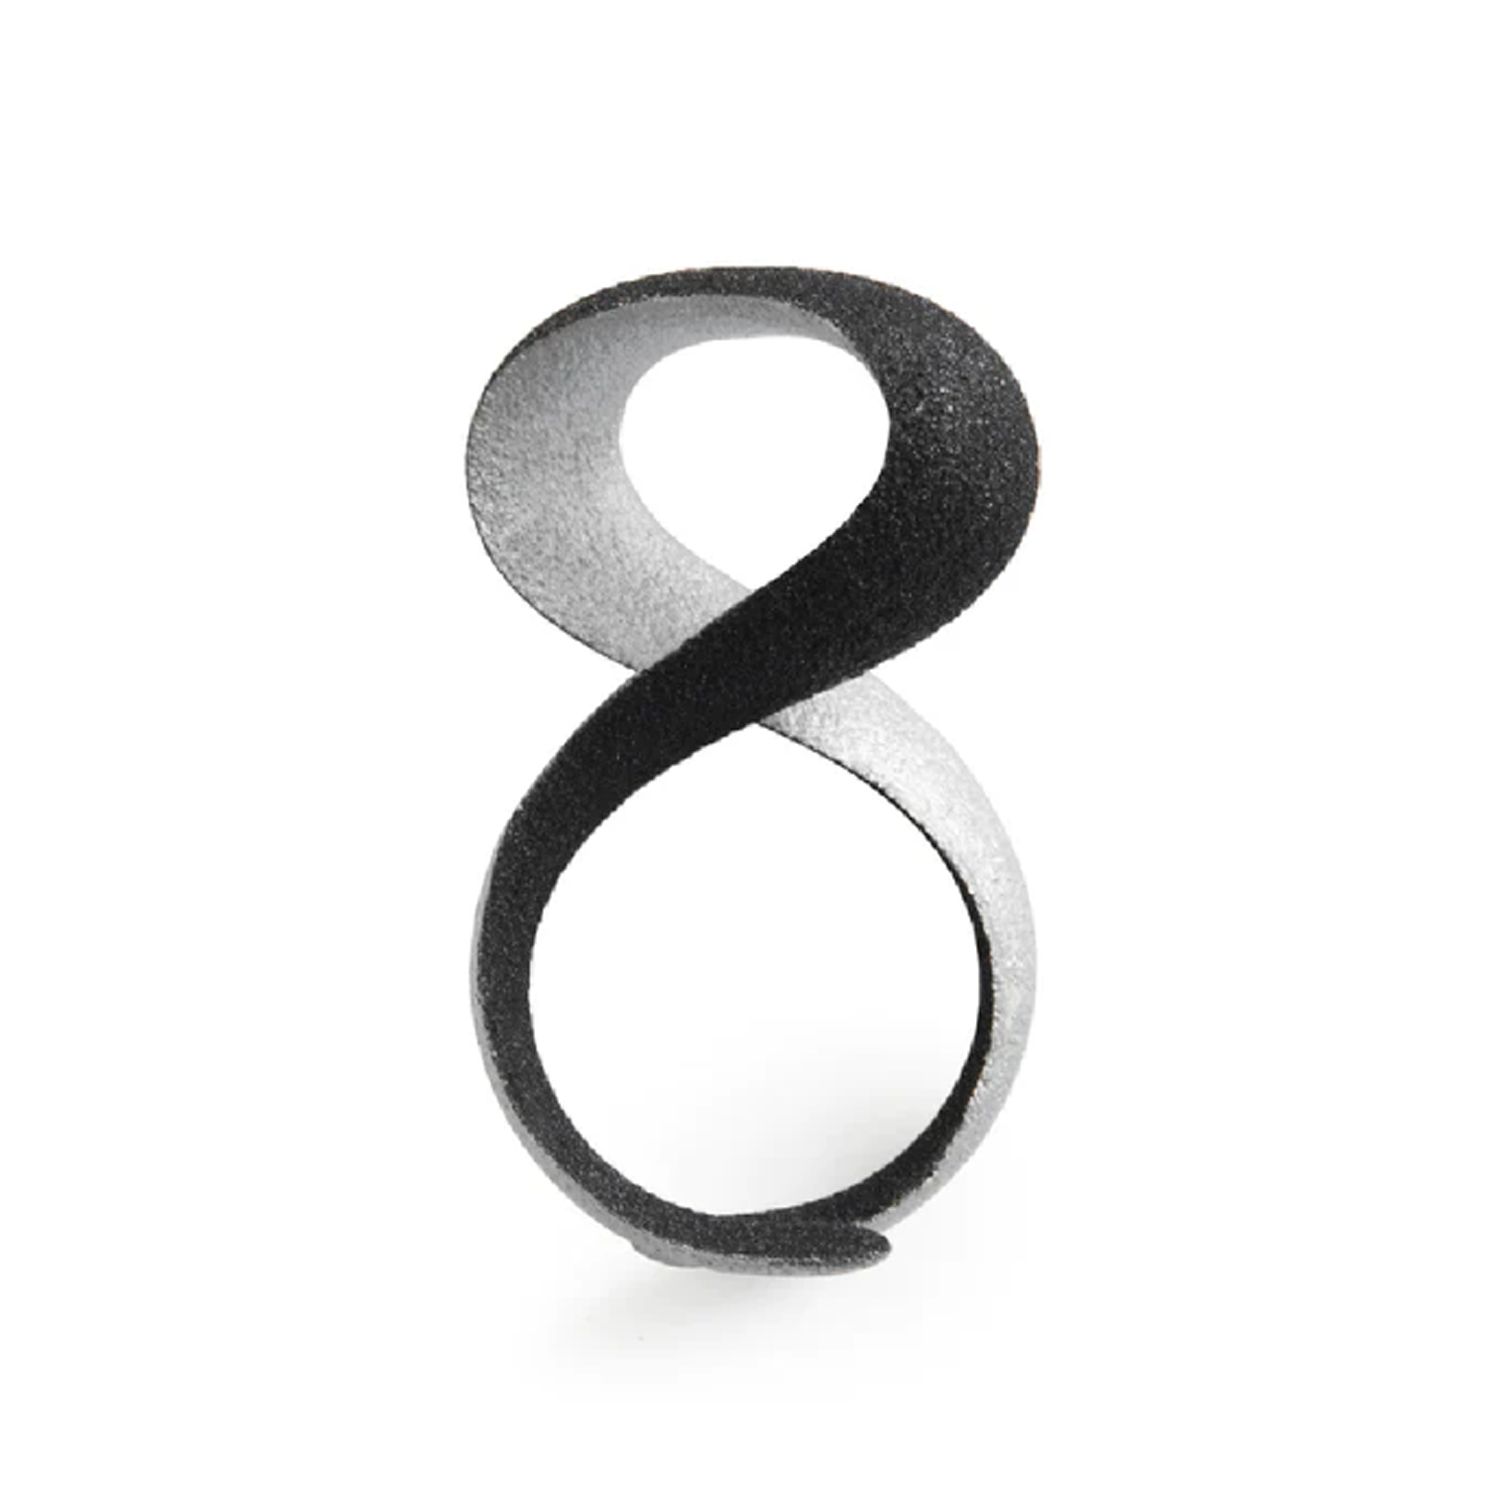 Maison 203: Flow Ring Black Silver Product Image 1 of 1